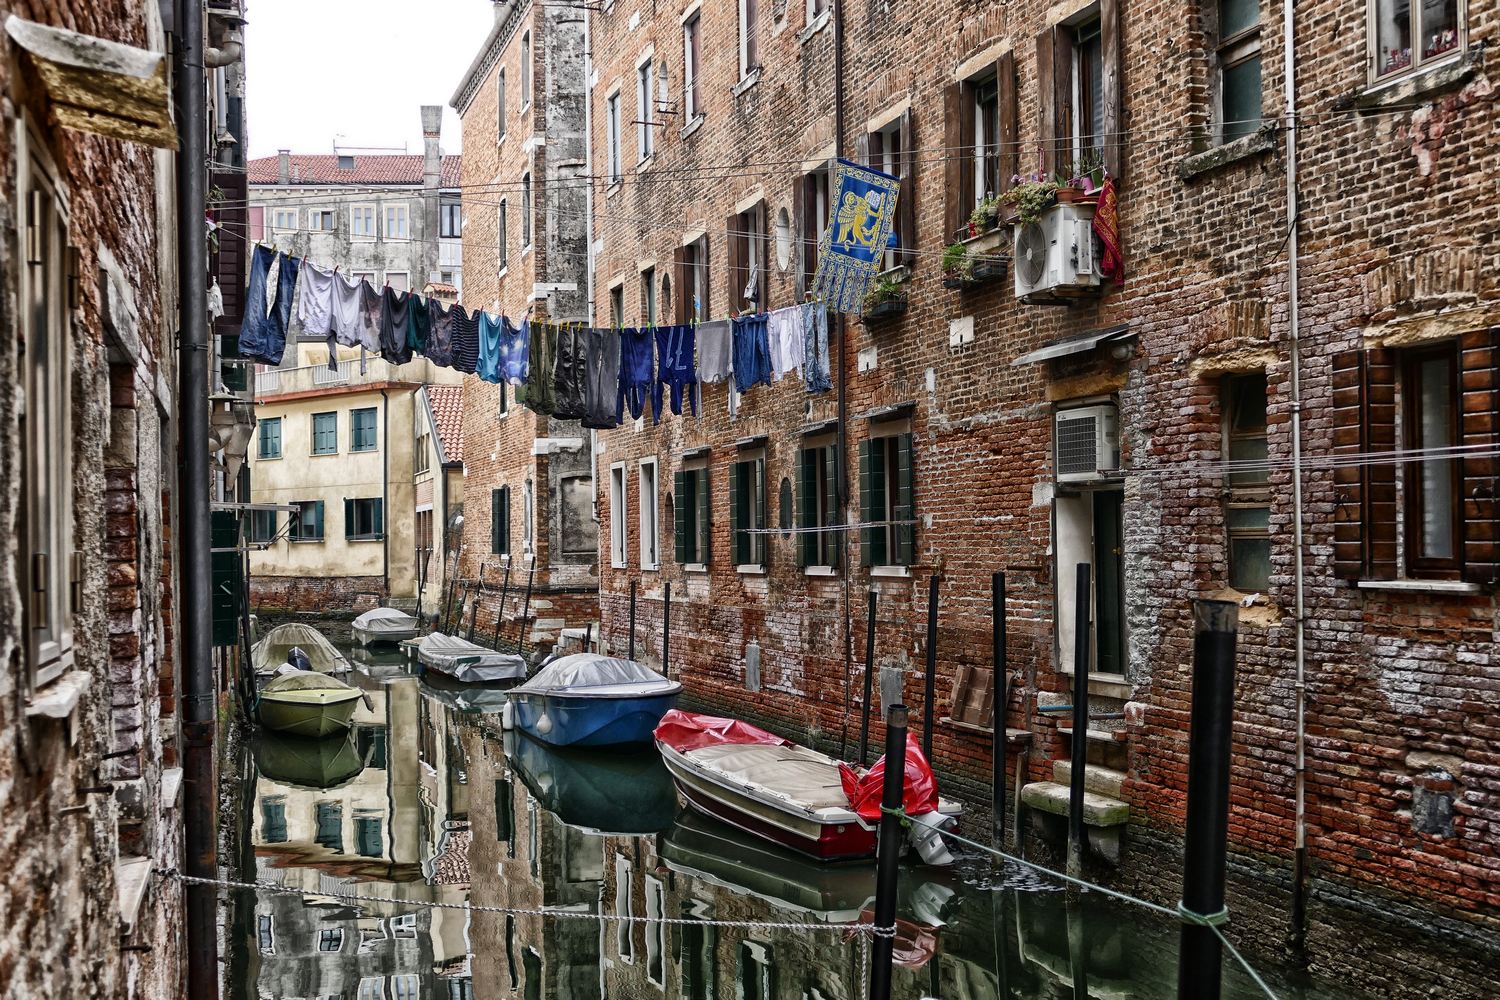 As in Venice we dry the clothes...